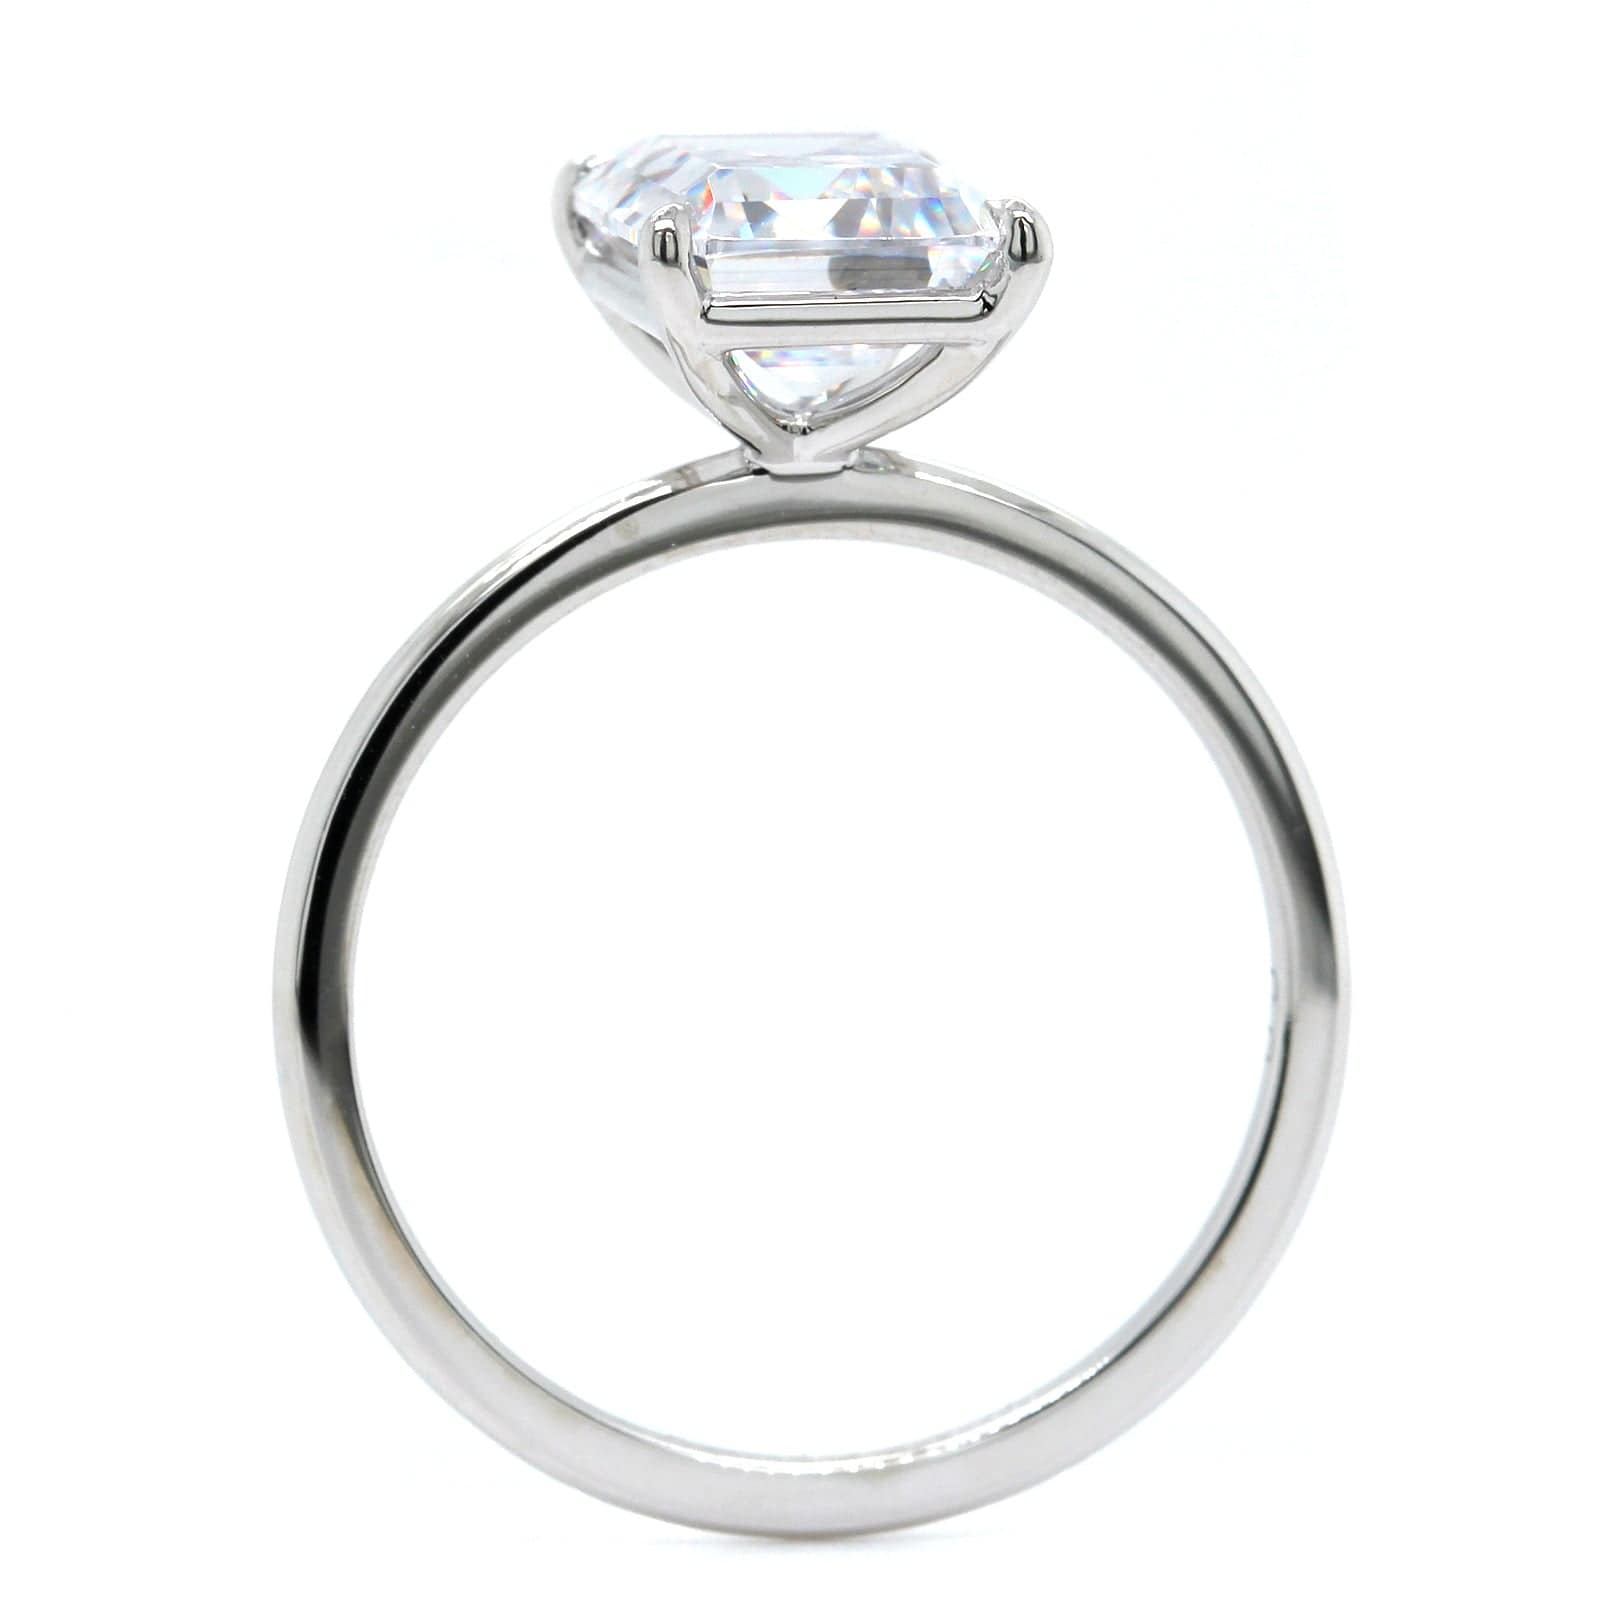 Platinum Emerald 4 Prong Solitaire Engagement Ring Setting, Platinum, Long's Jewelers